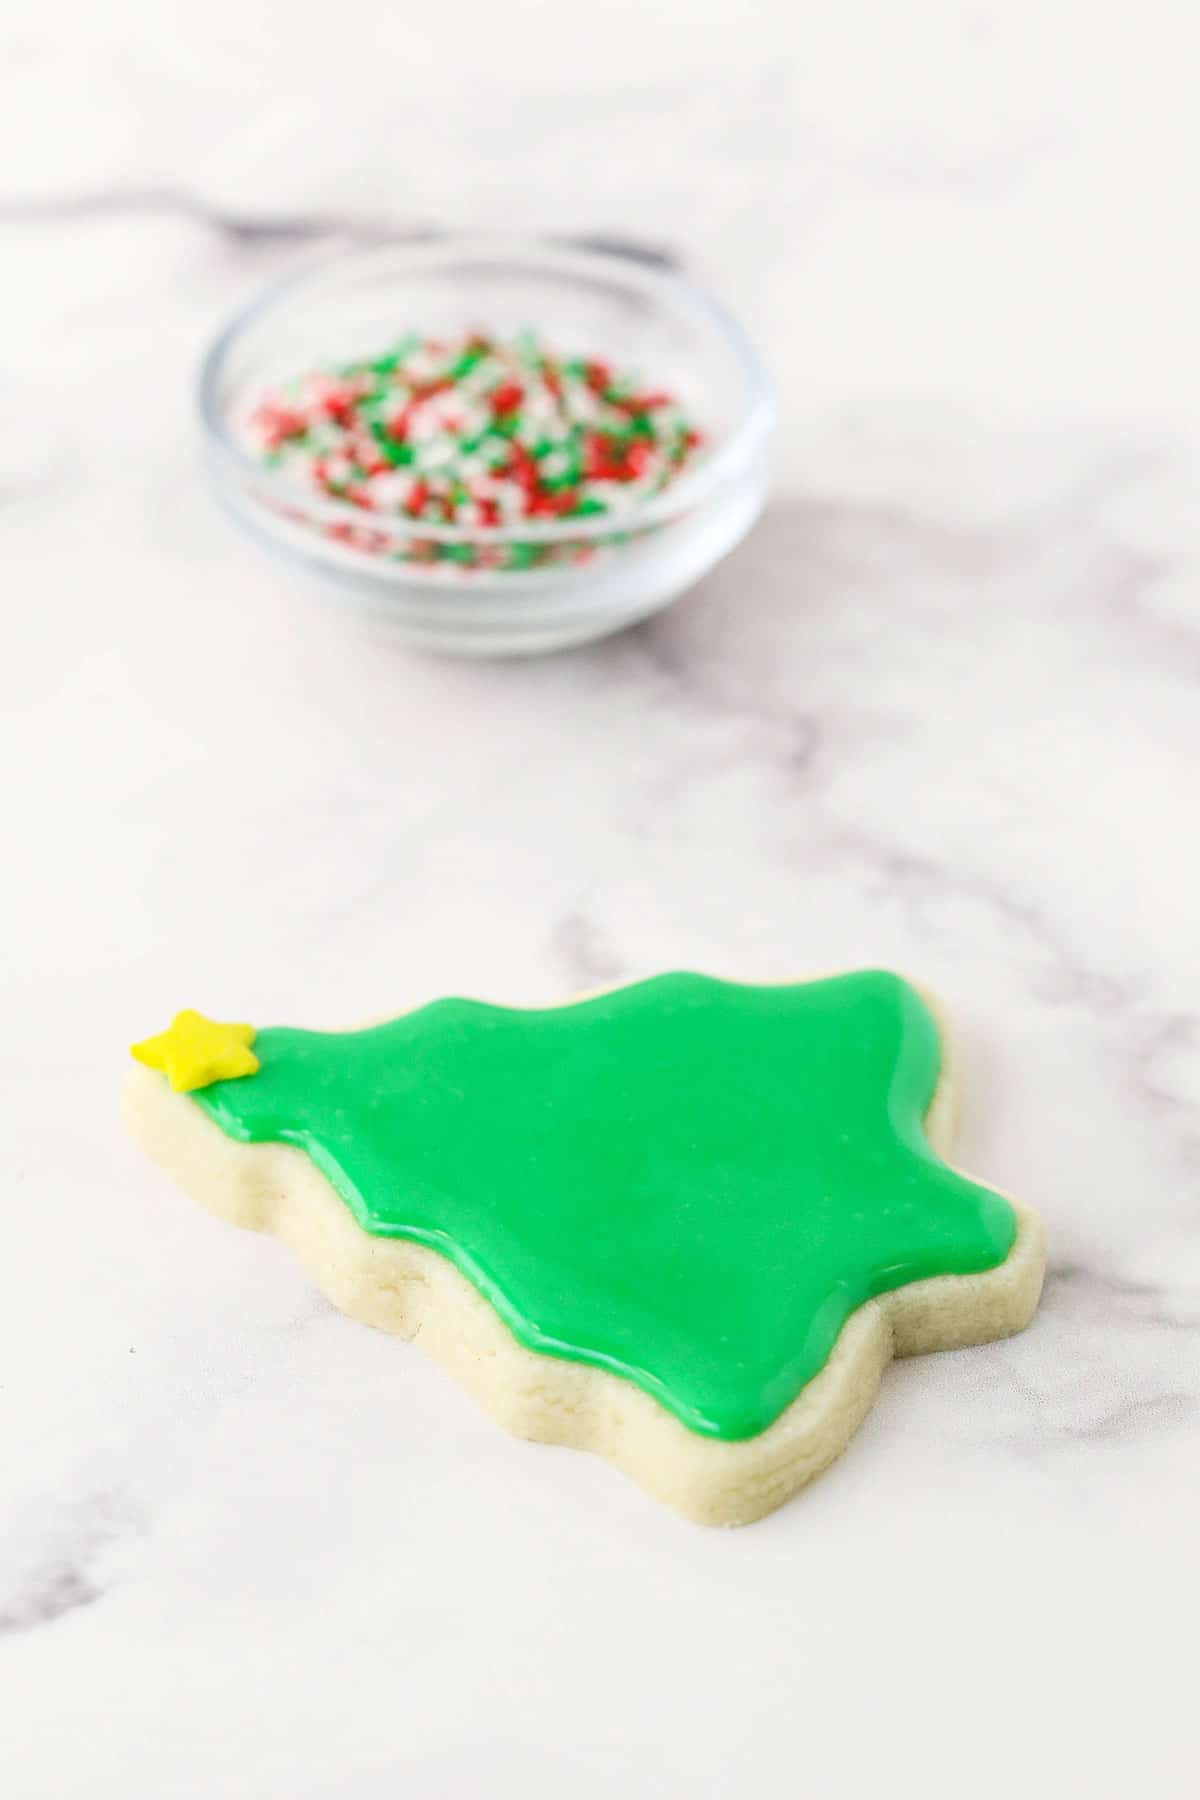 A single sugar cookie in the shape of a Christmas tree with green icing on top of it